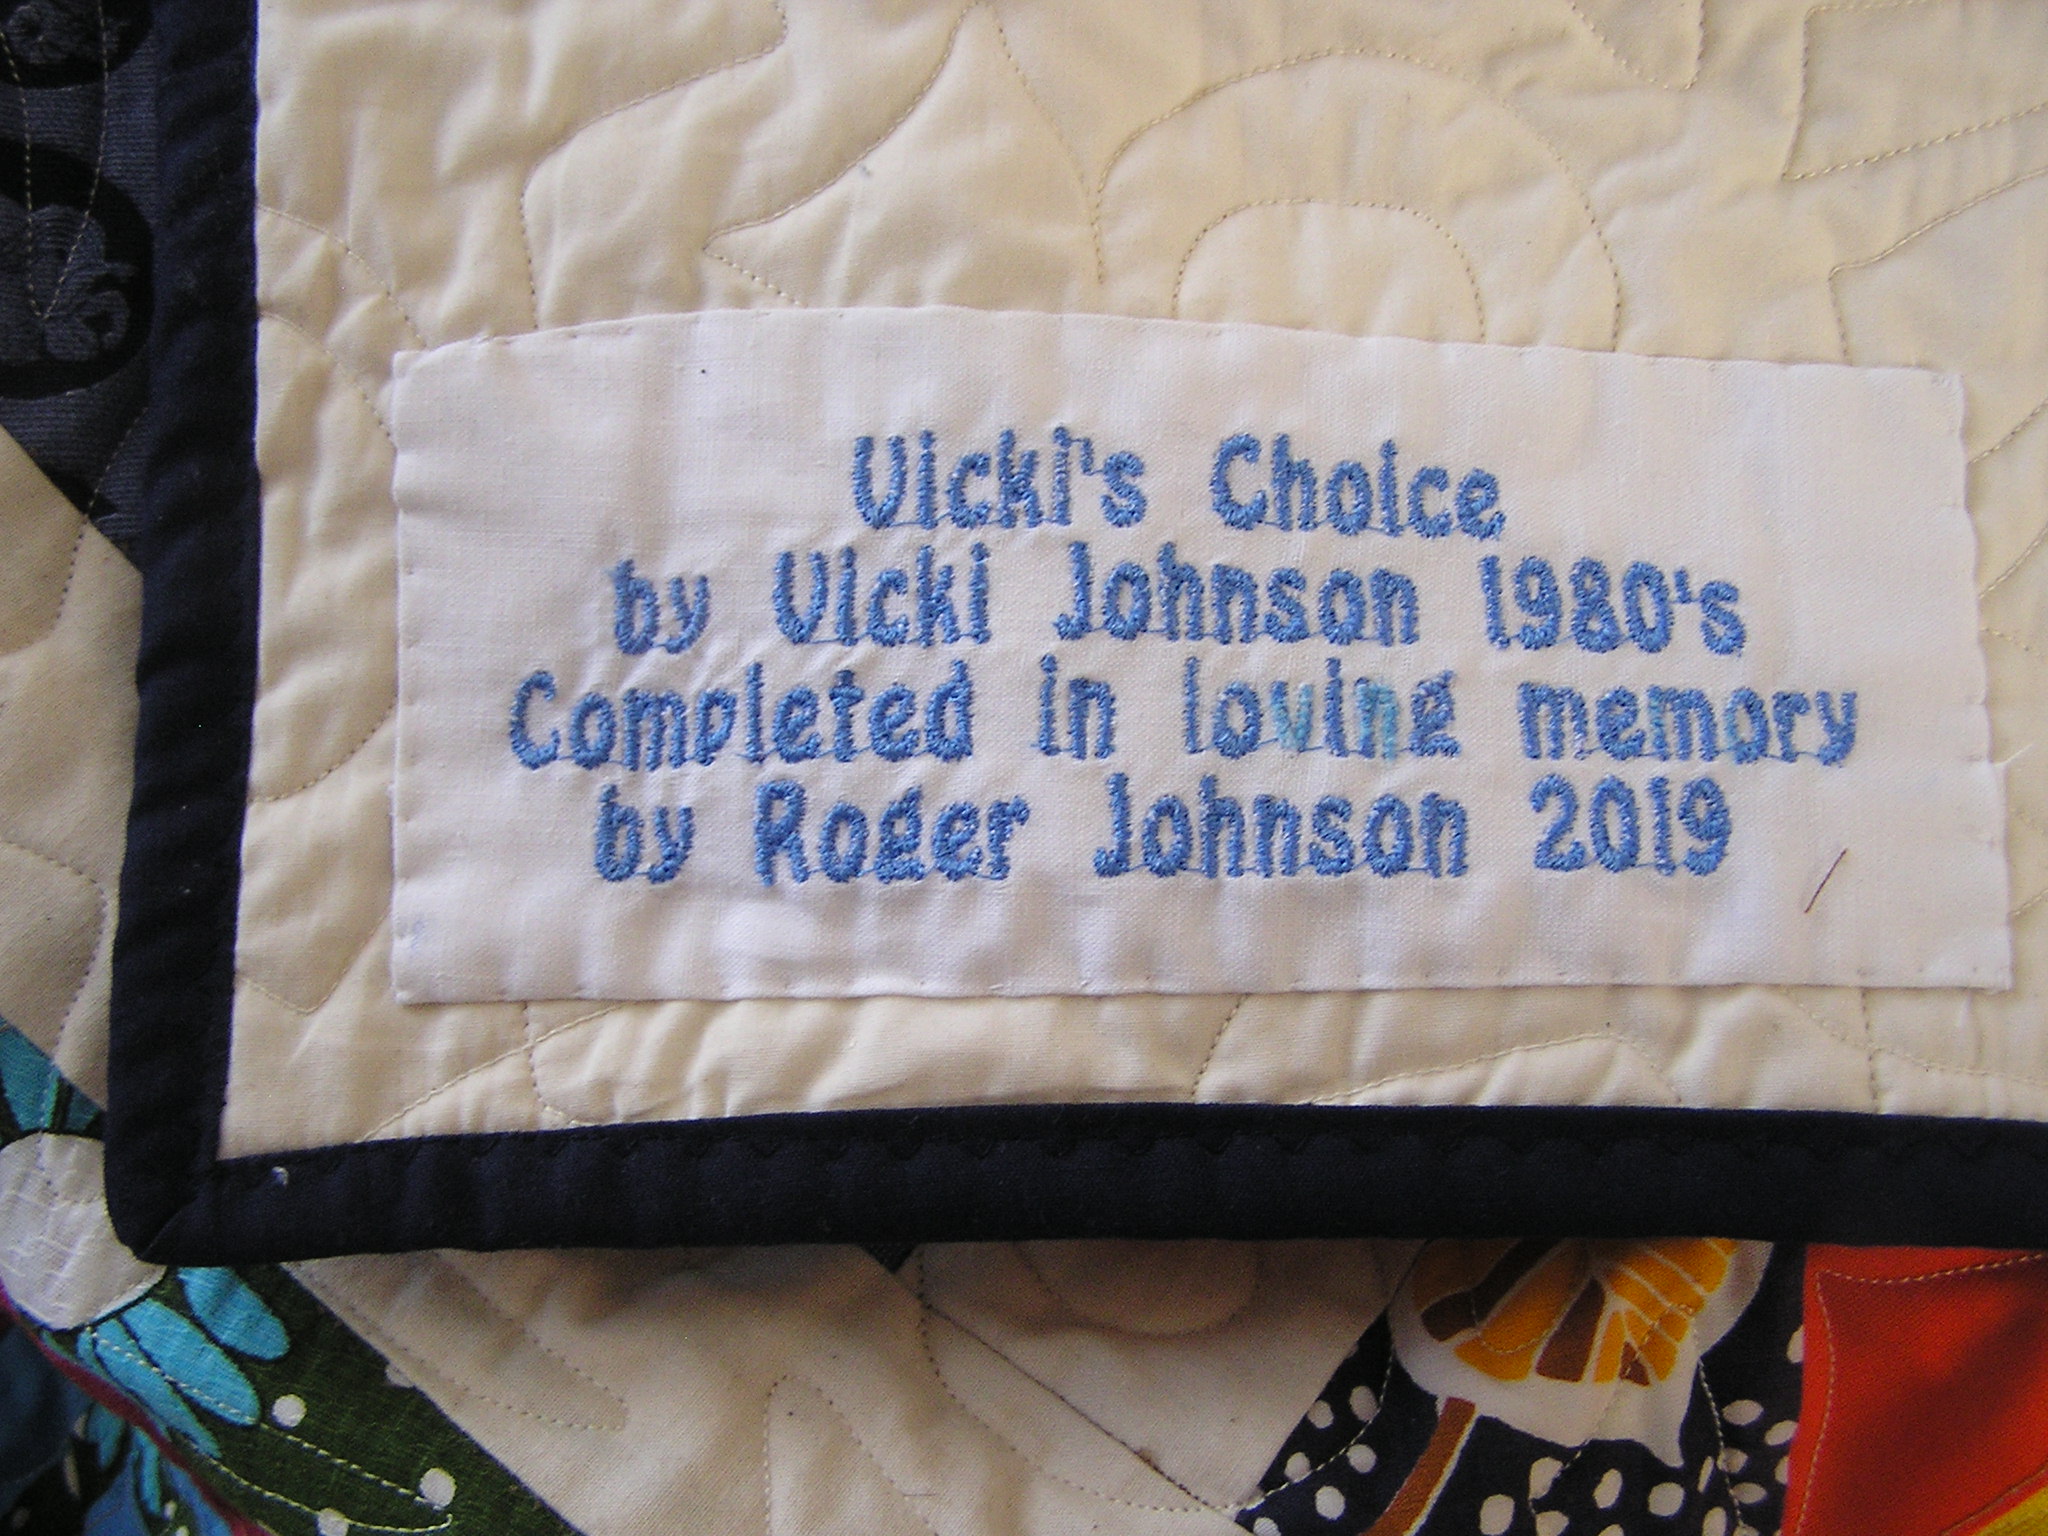 Roger named the quilt design Vicki created “Vicki’s Choice” and affixed labels on each quilt with the hope that they can be appreciated for generations.